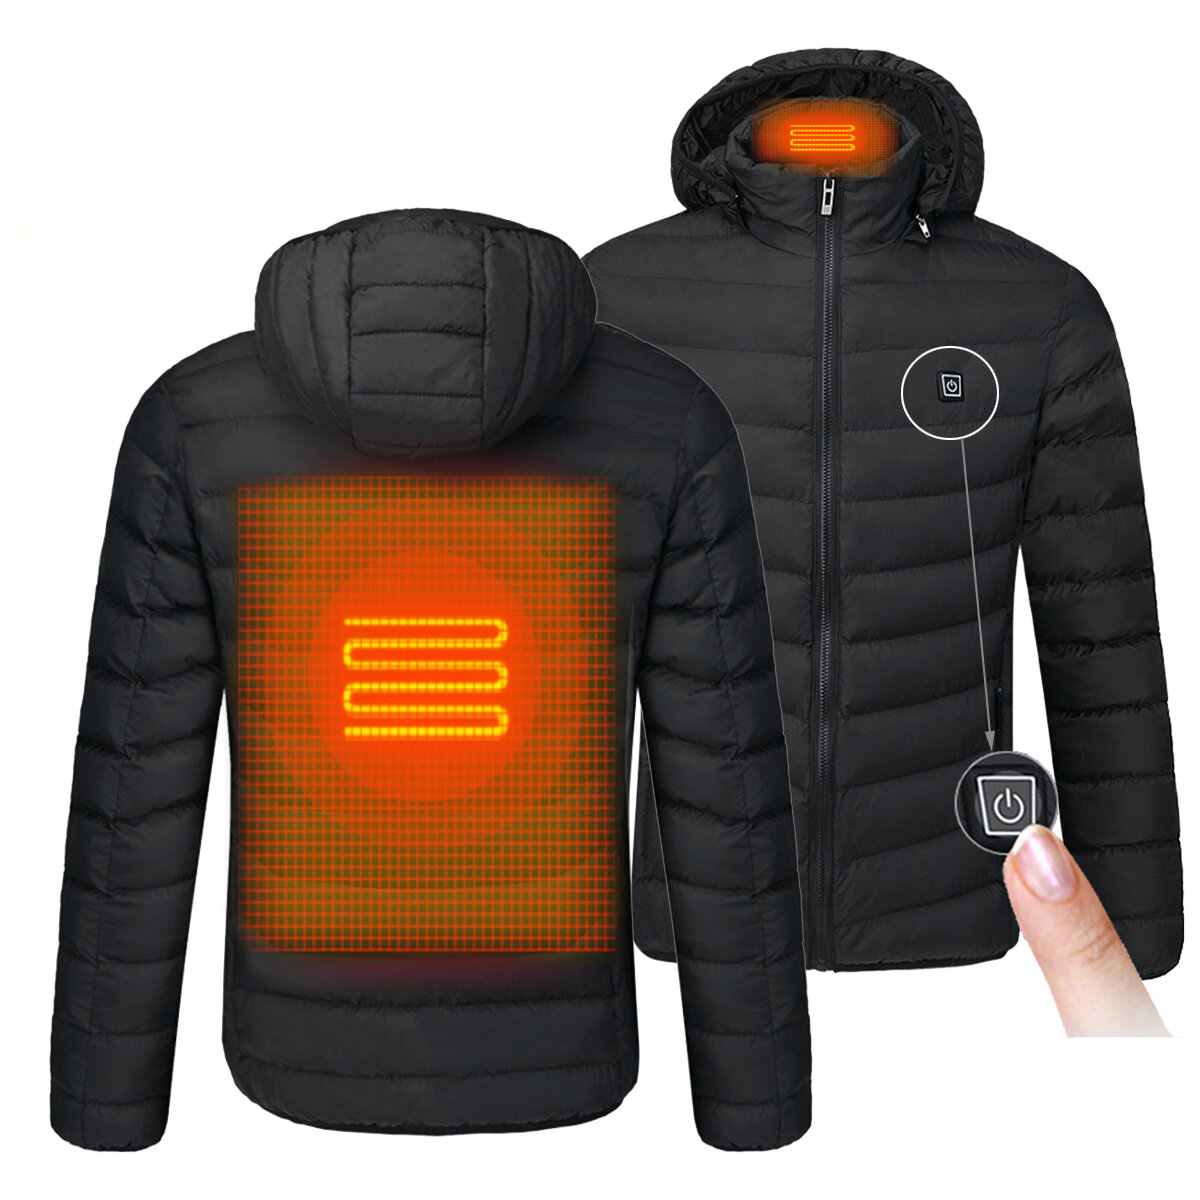 Image of S/M/4XL Mens USB Heated Warm Back Cervical Spine Hooded Winter Jacket Motorcycle Skiing Riding Coat